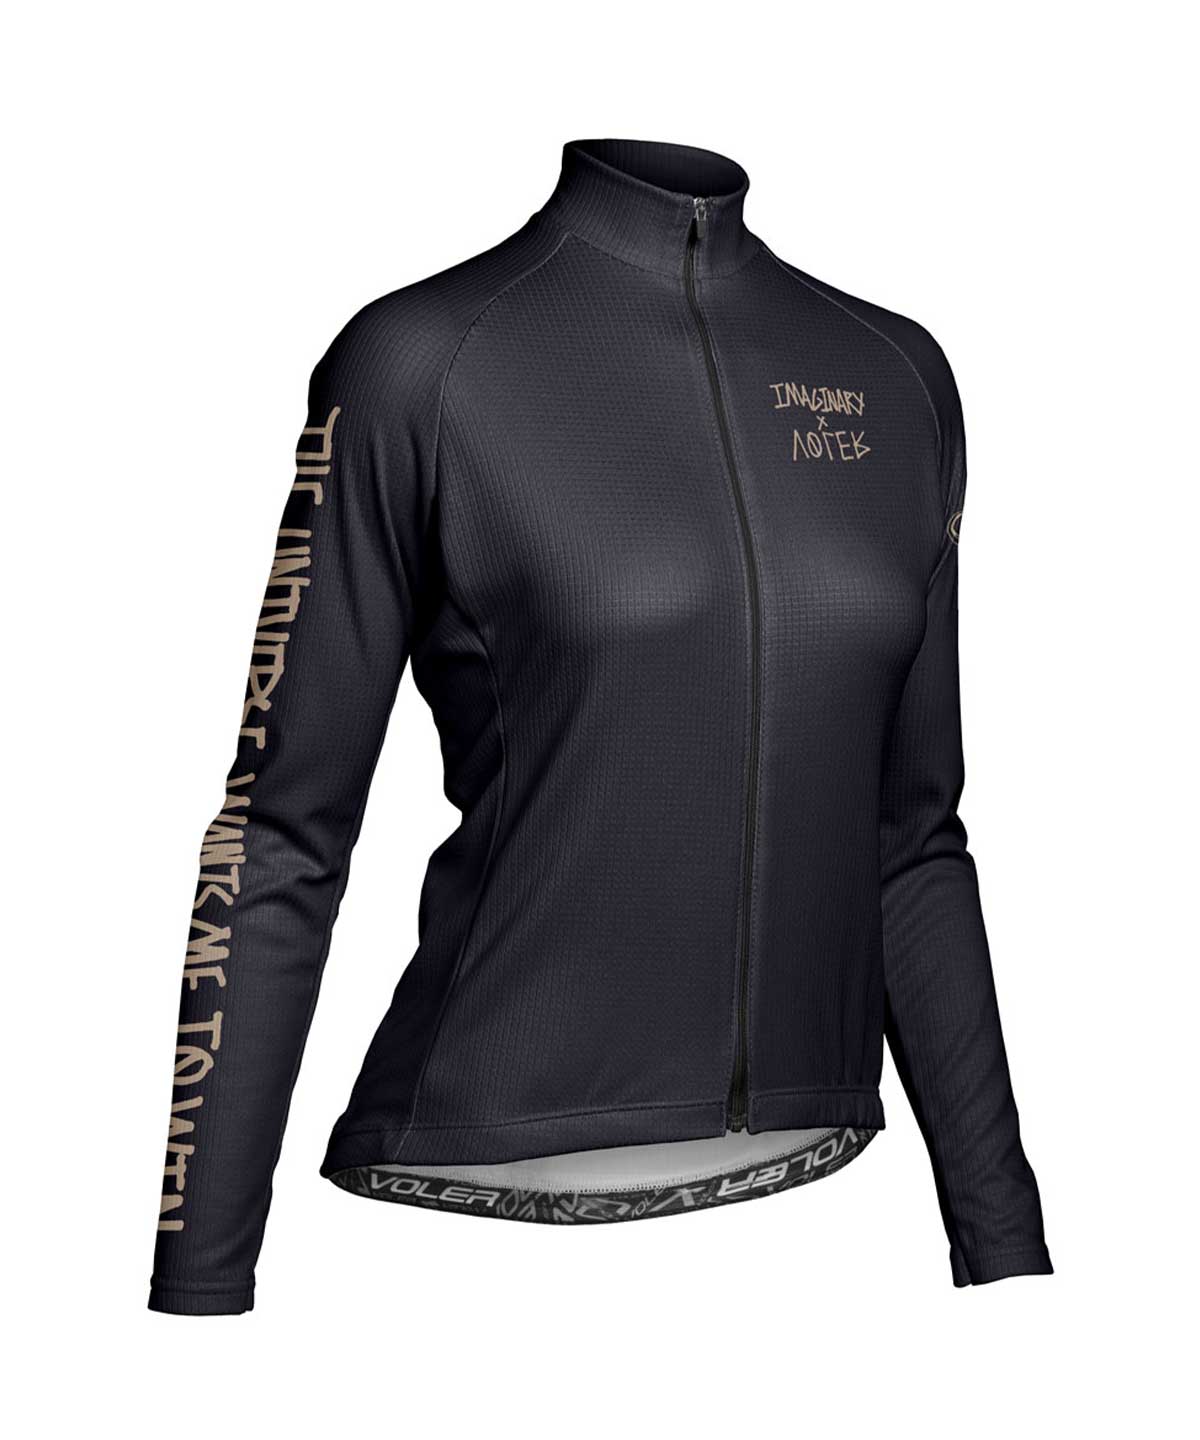 W. PELOTON THERMAL JERSEY - IMAGINARY COLLECTIVE